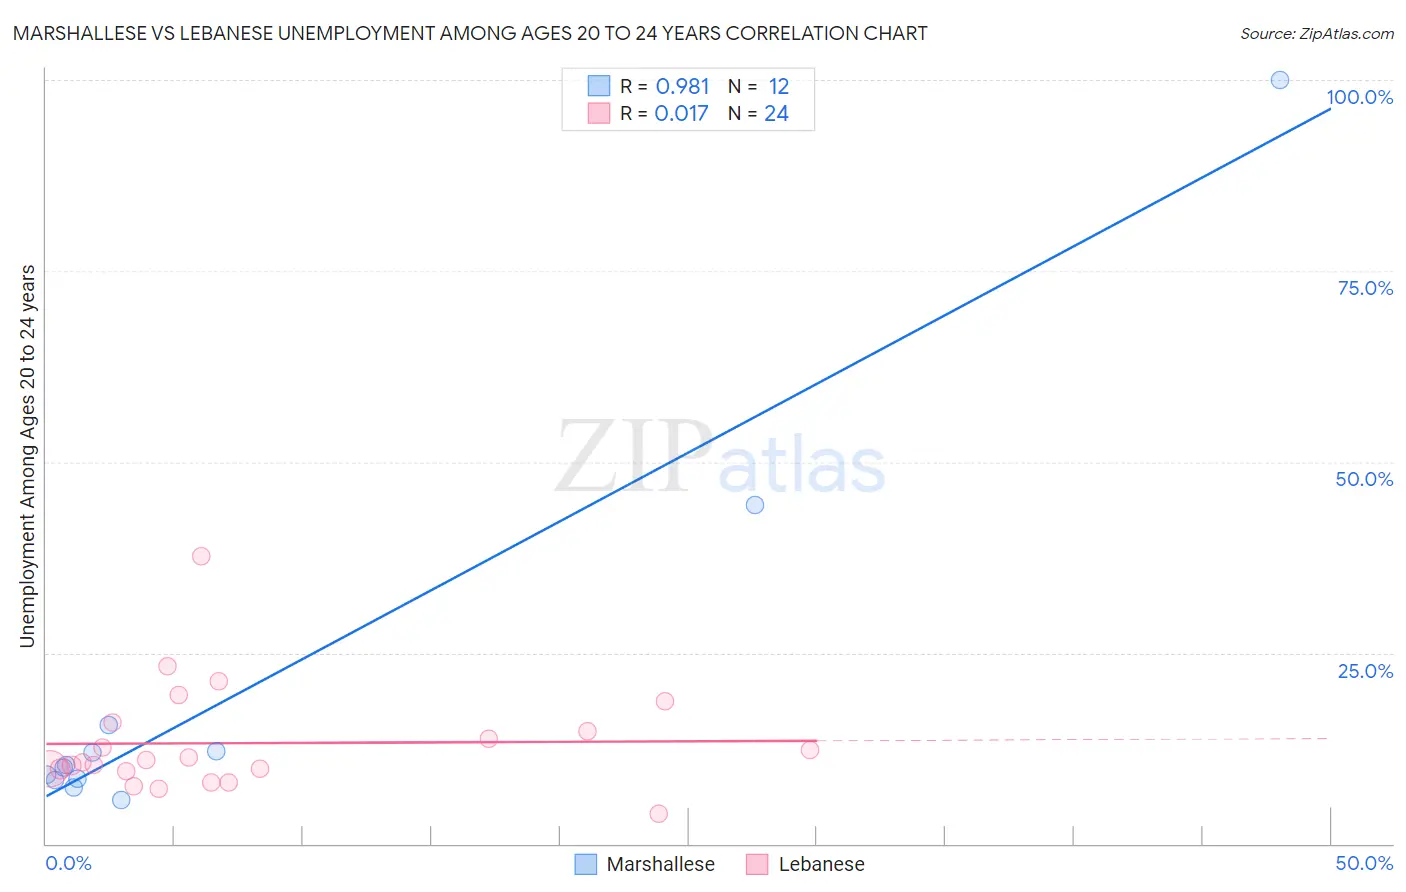 Marshallese vs Lebanese Unemployment Among Ages 20 to 24 years